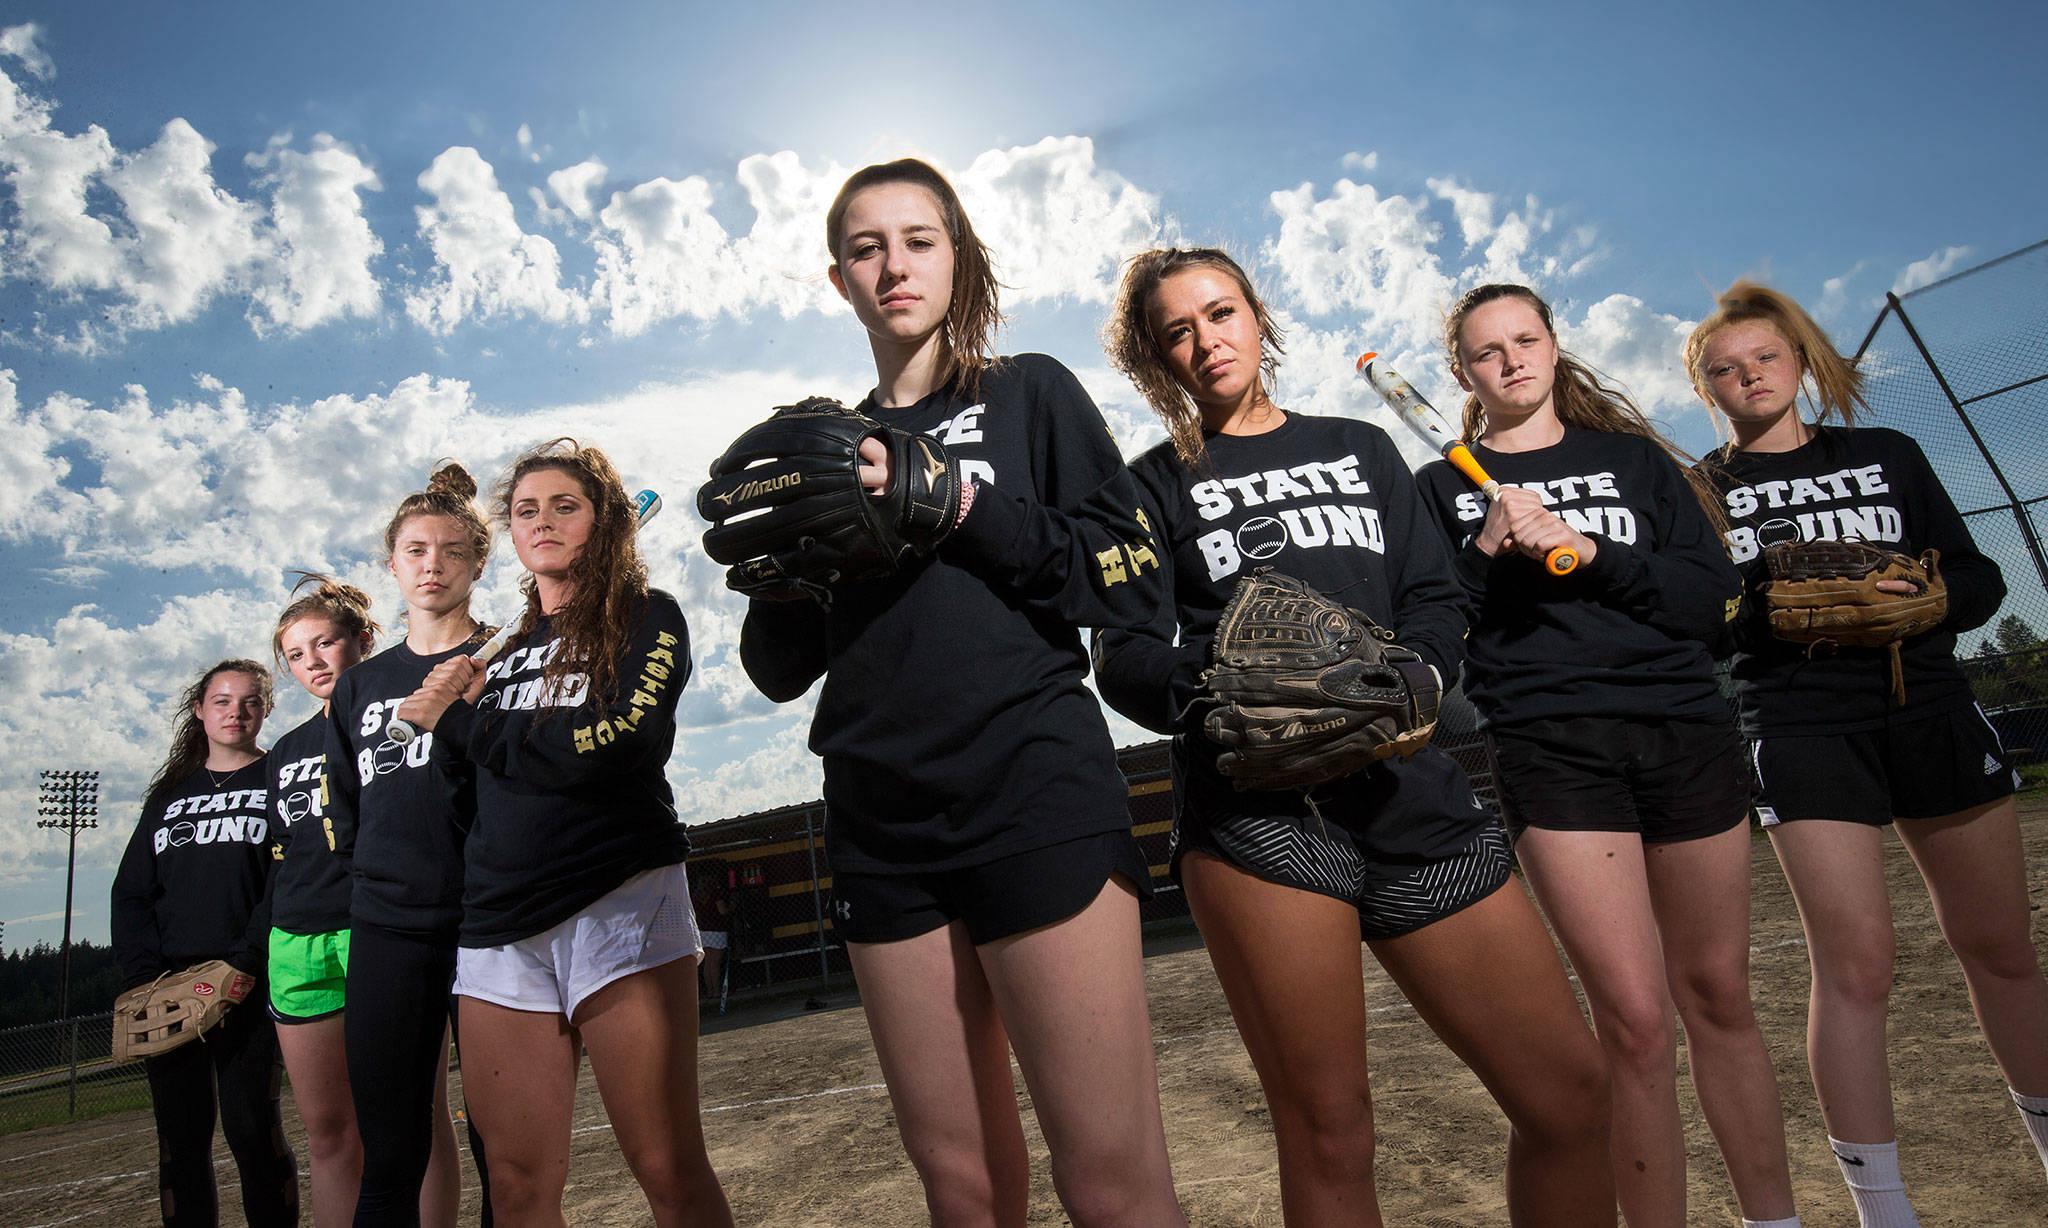 Members of the Lakewood High School softball team pose for a photo at the school on Wednesday. Lakewood opens state play on Friday in Selah. (Andy Bronson / The Herald)